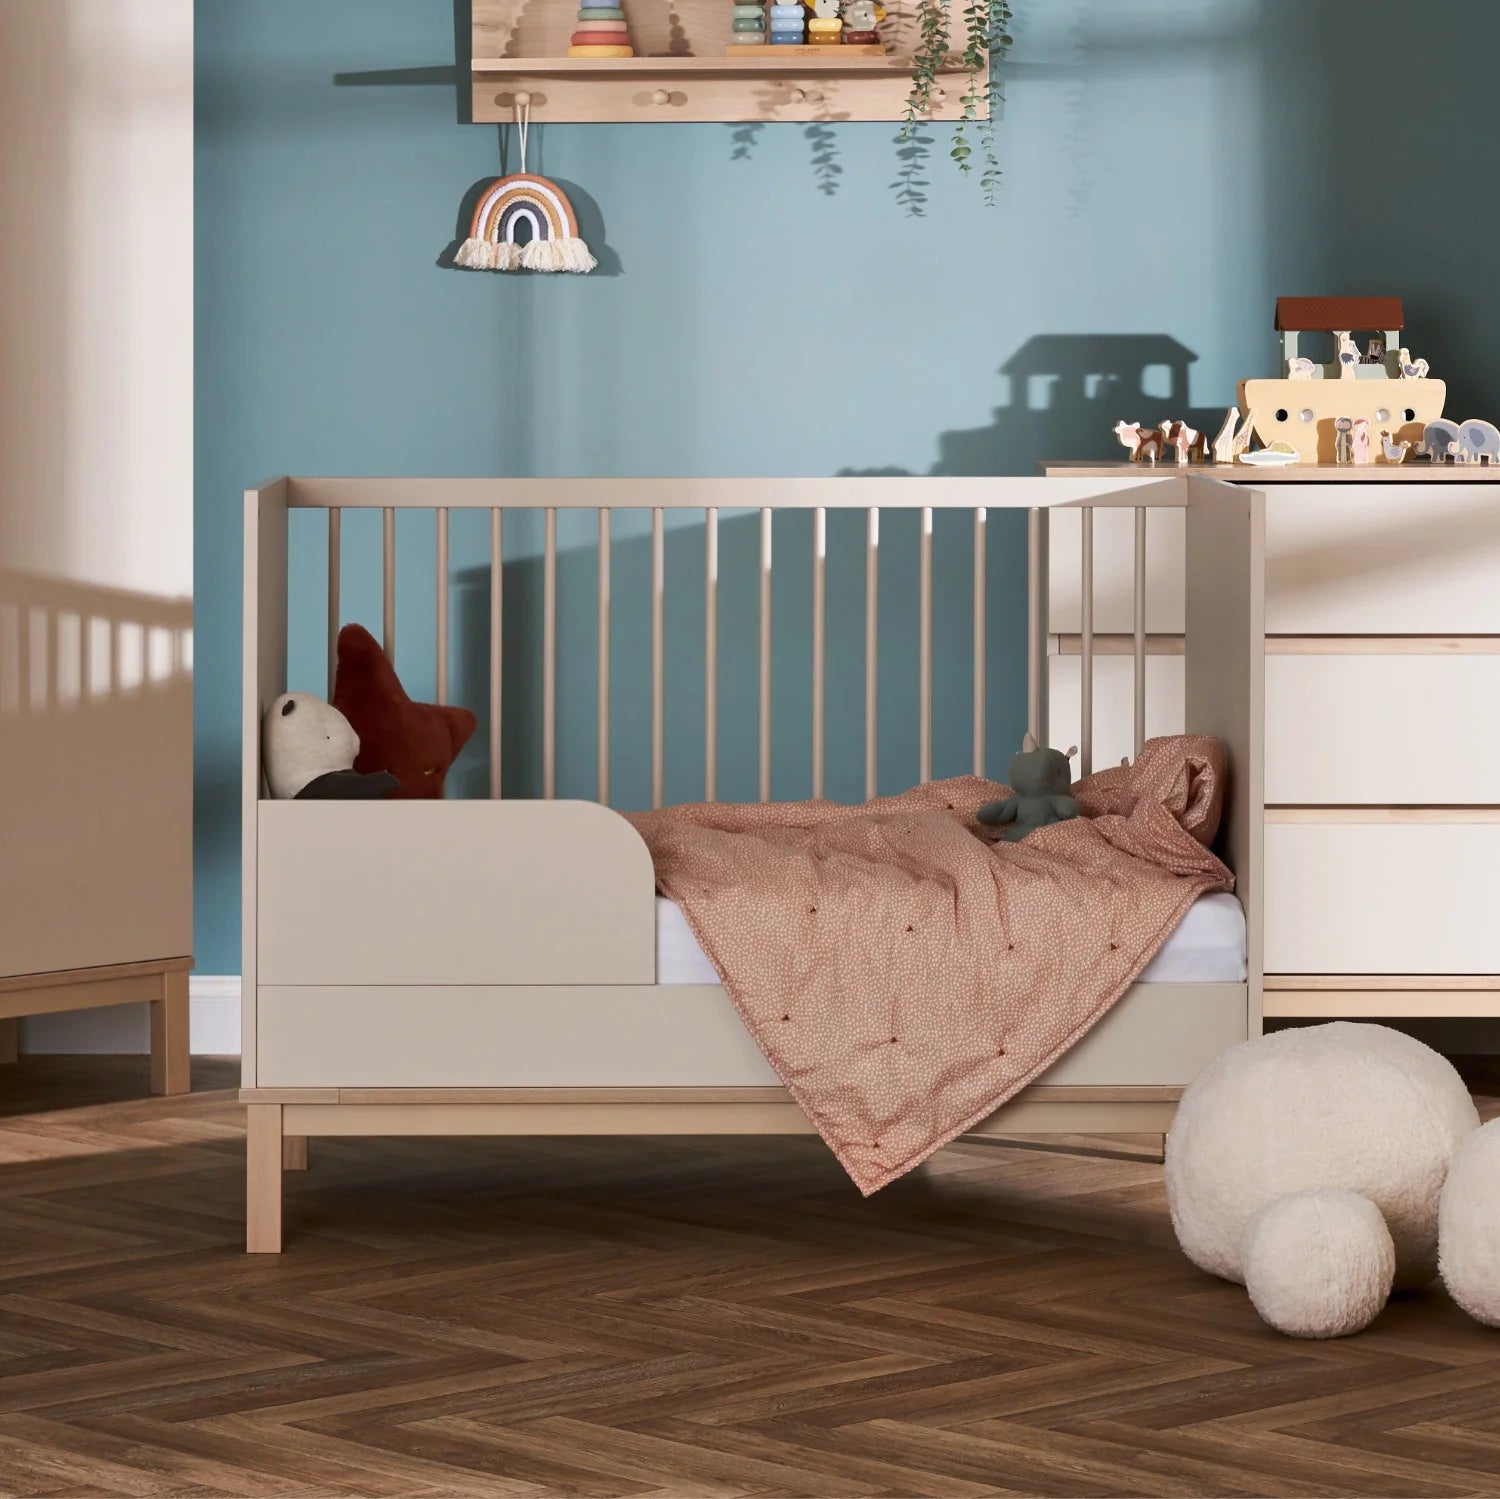 The Home of Luxury Baby & Toddler Essentials – Harlison Luxe Baby